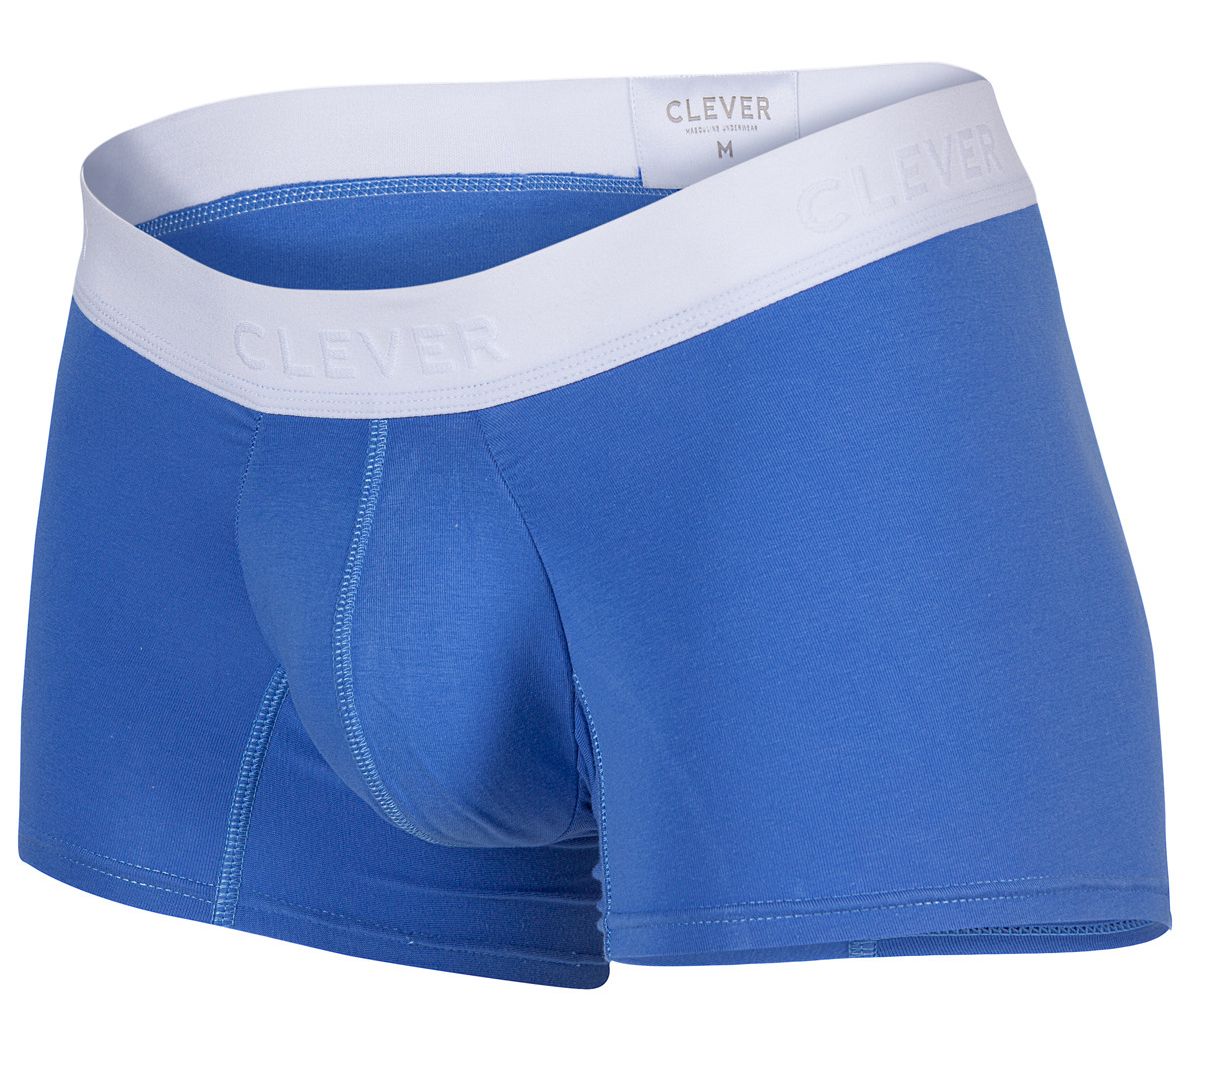 Clever 1508 Tethis Trunks